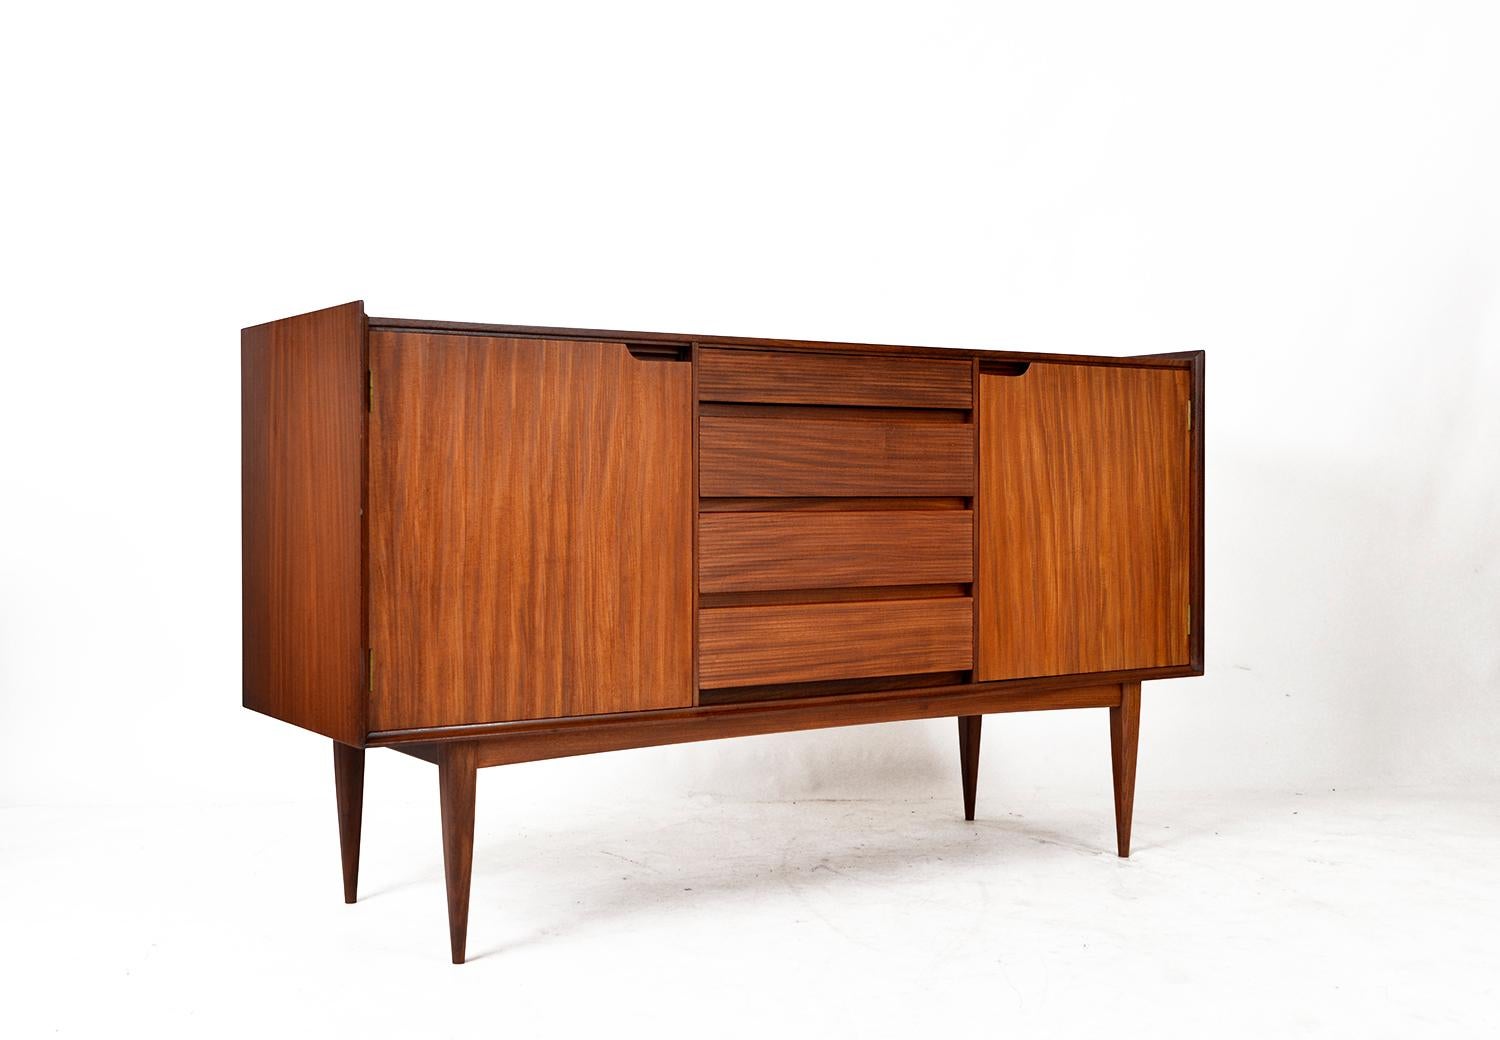 This delightful sideboard was designed by Richard Hornby for Fyne Ladye Furniture during the 1960s. The piece provides ample storage space with its two spacious cupboards, which open to reveal adjustable shelves. The four central drawers feature